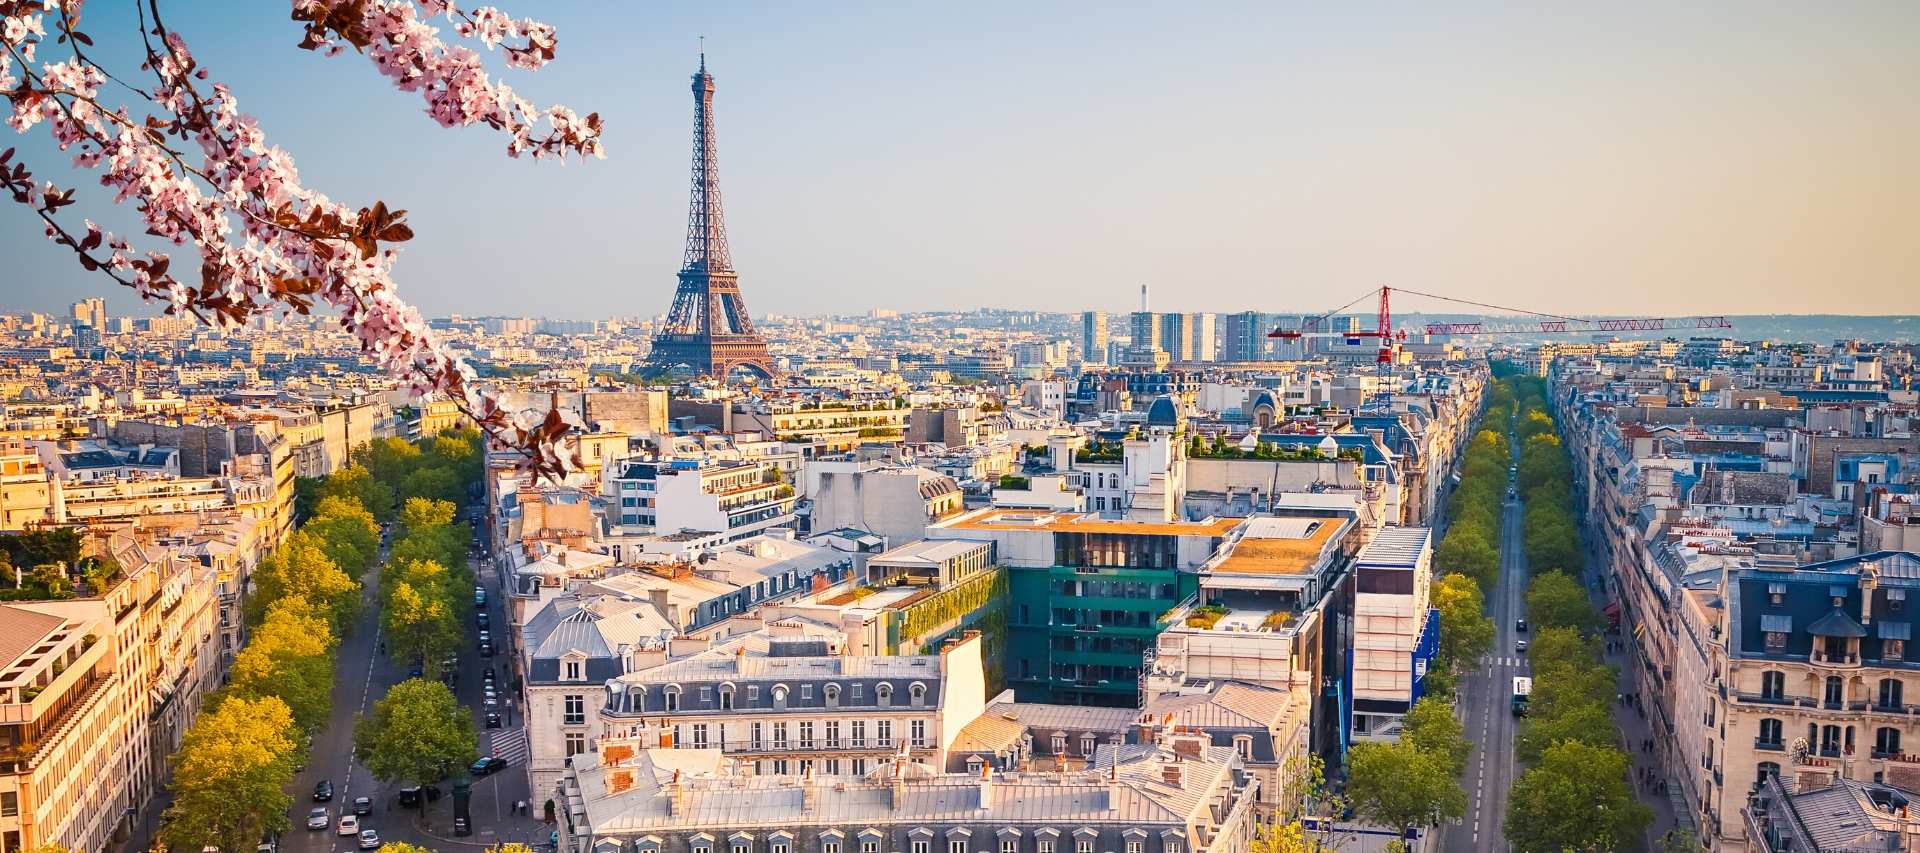 How to Spend the Perfect Weekend in Paris